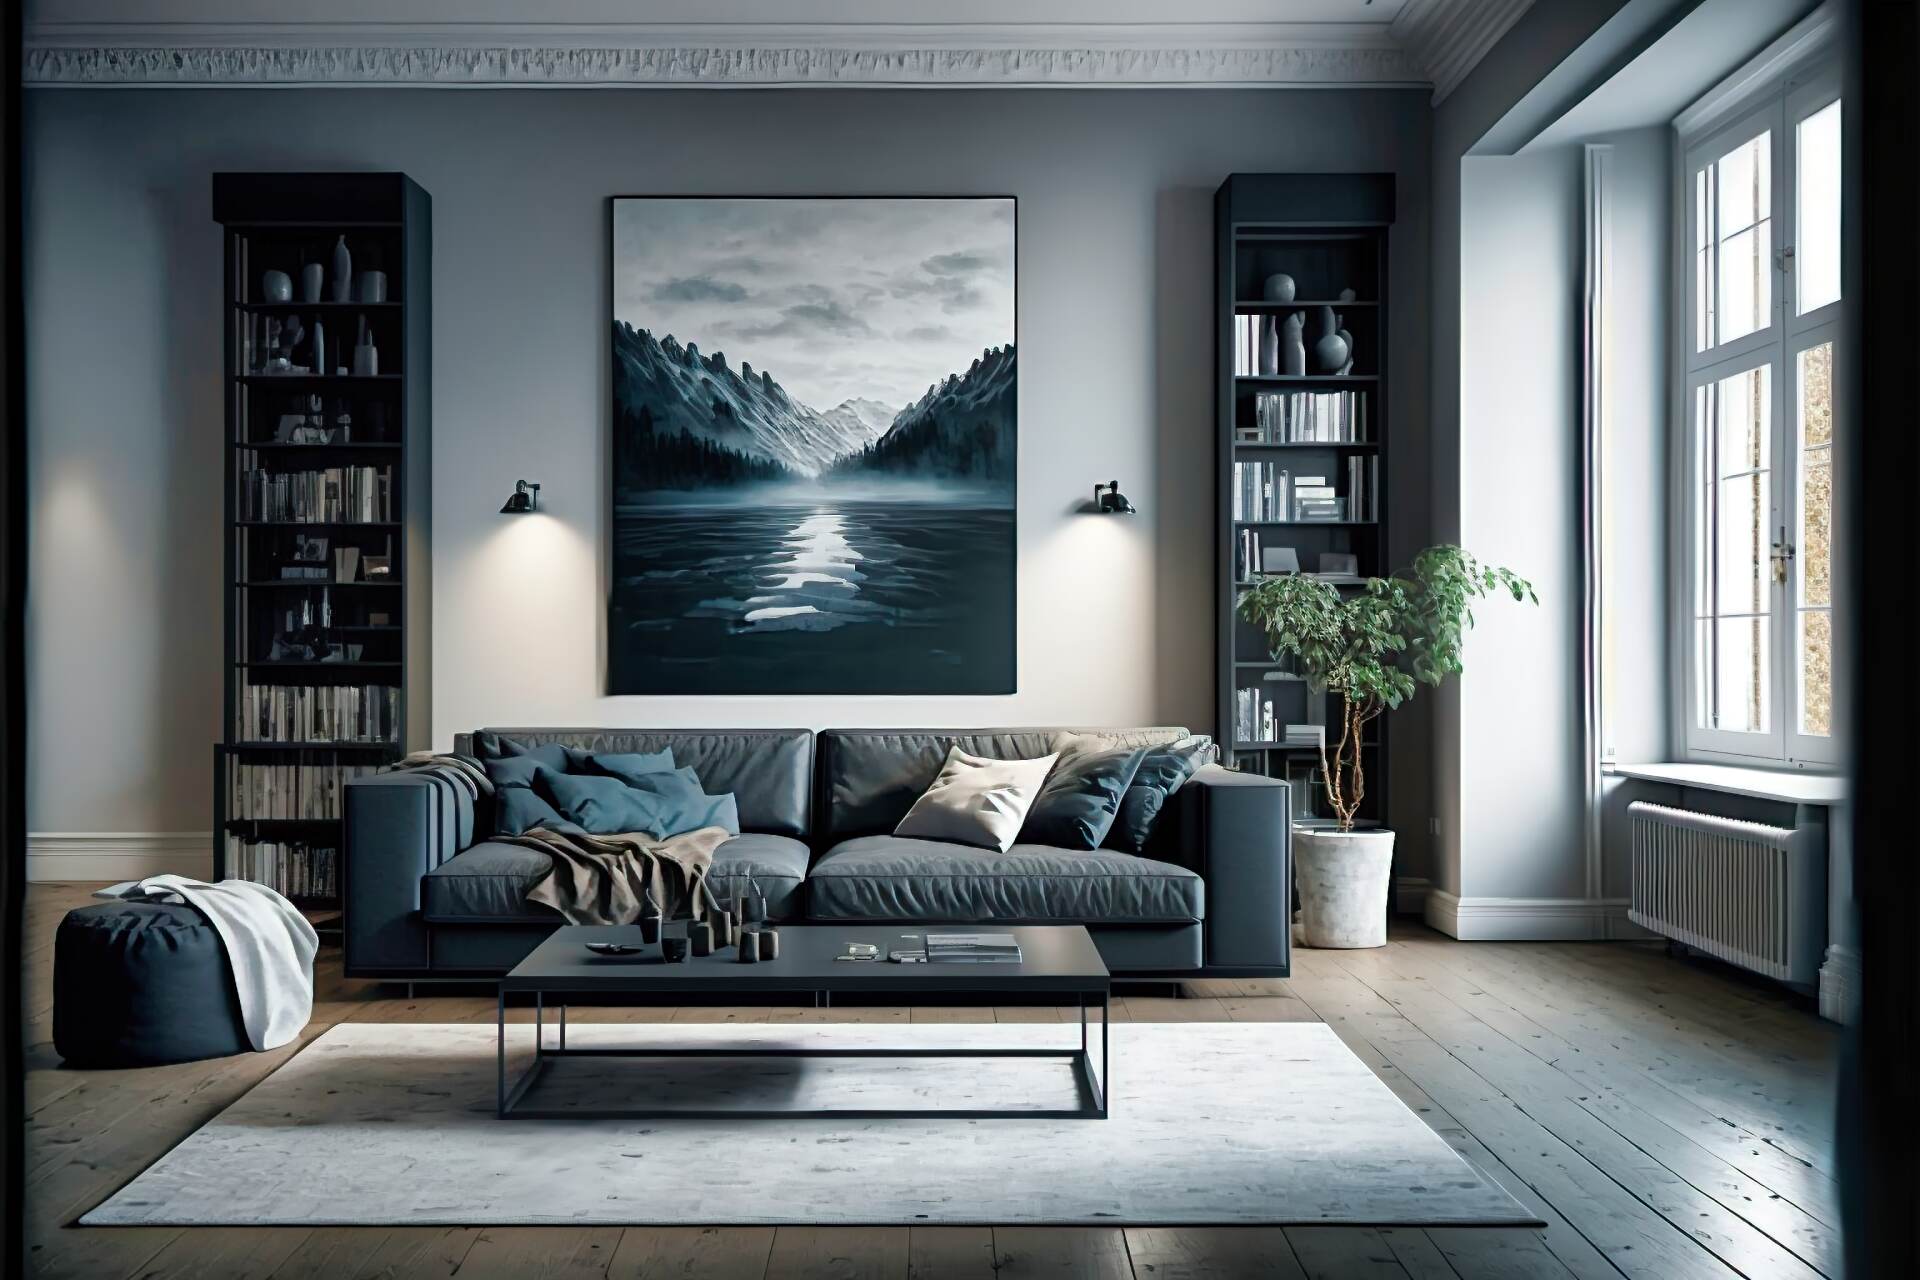 This Modern Living Room Features A Soft Grey Color Scheme. A Single Black Leather Armchair Provides A Comfortable Seating Option, While A Sleek White Sofa And A Geometric Rug Add A Modern Touch. A Large Abstract Painting And A Few Bookshelves Complete The Look.